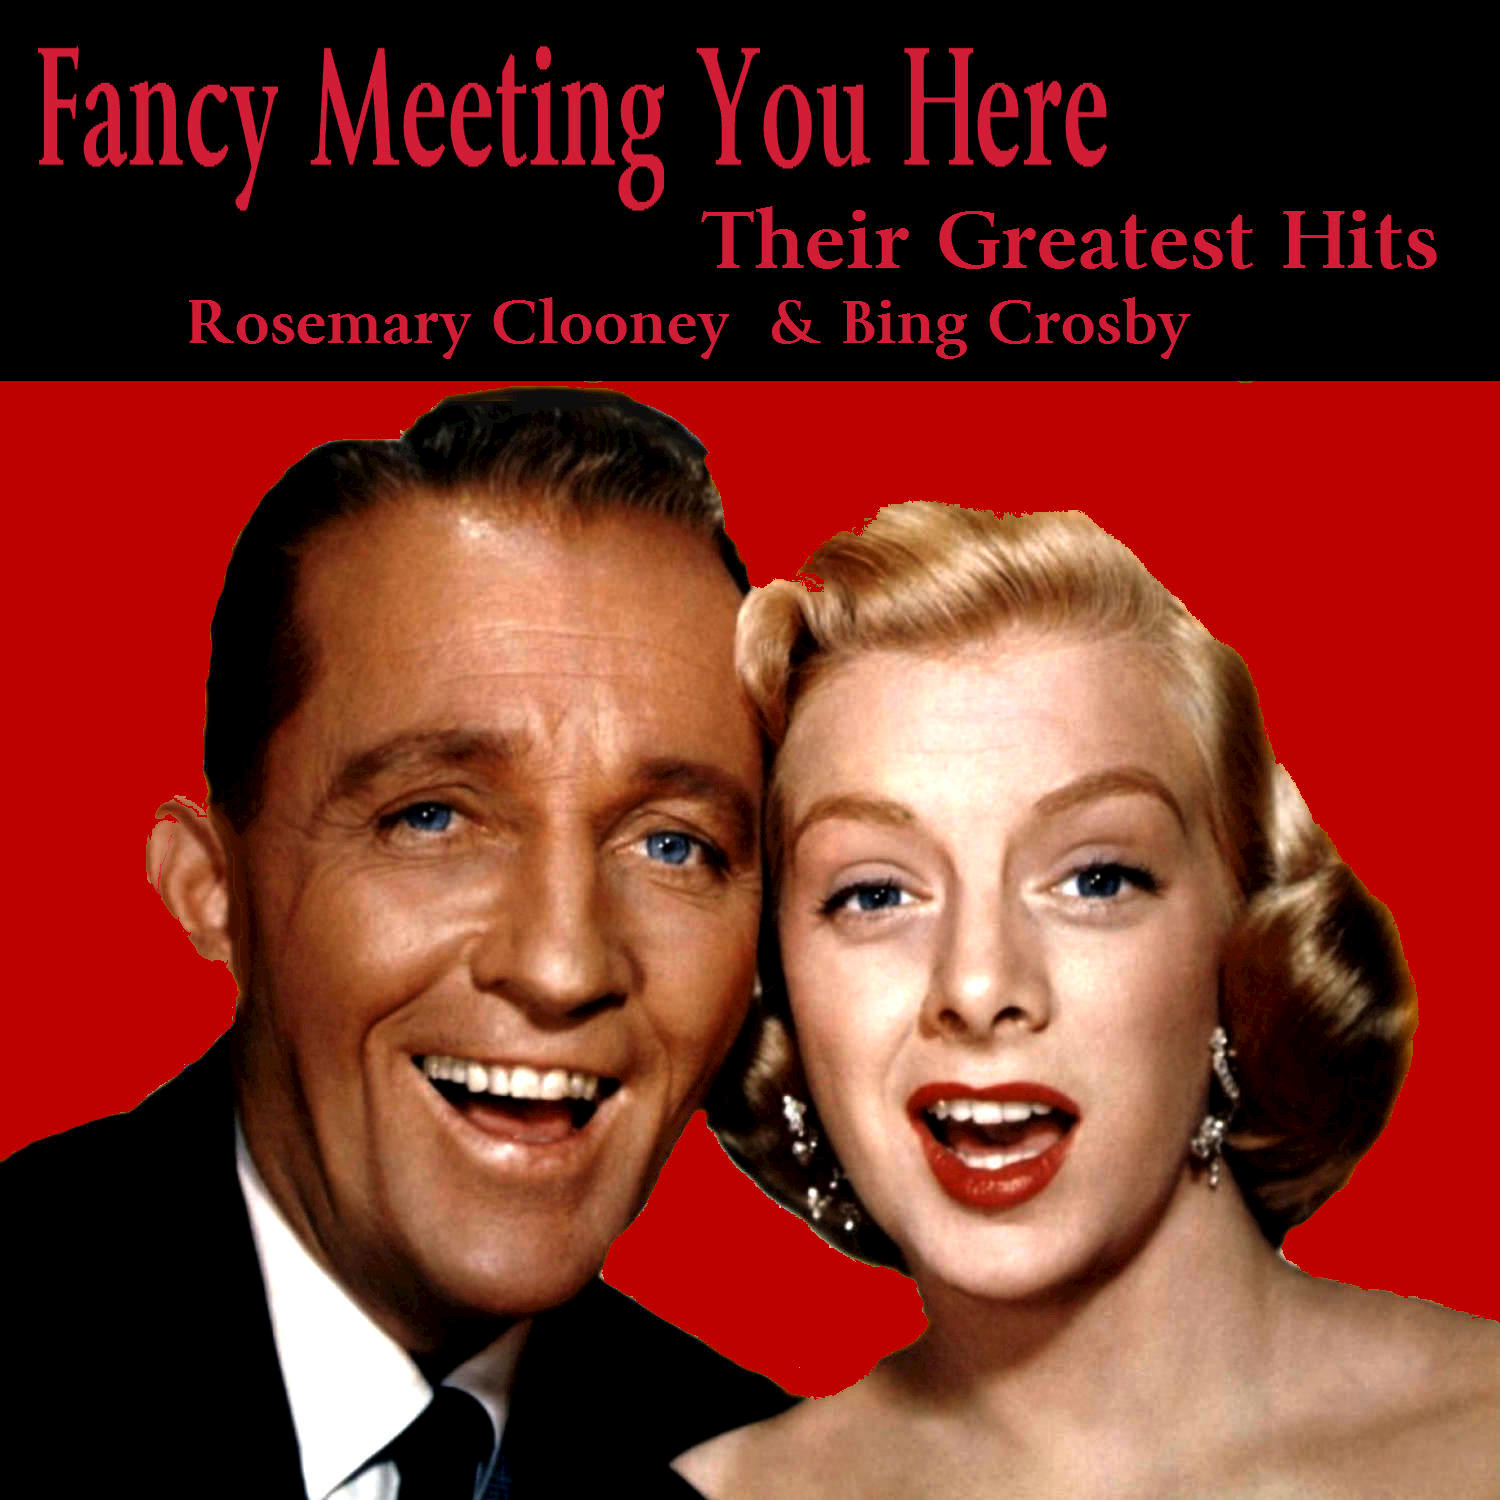 Fancy Meeting You Here - Their Greatest Hits